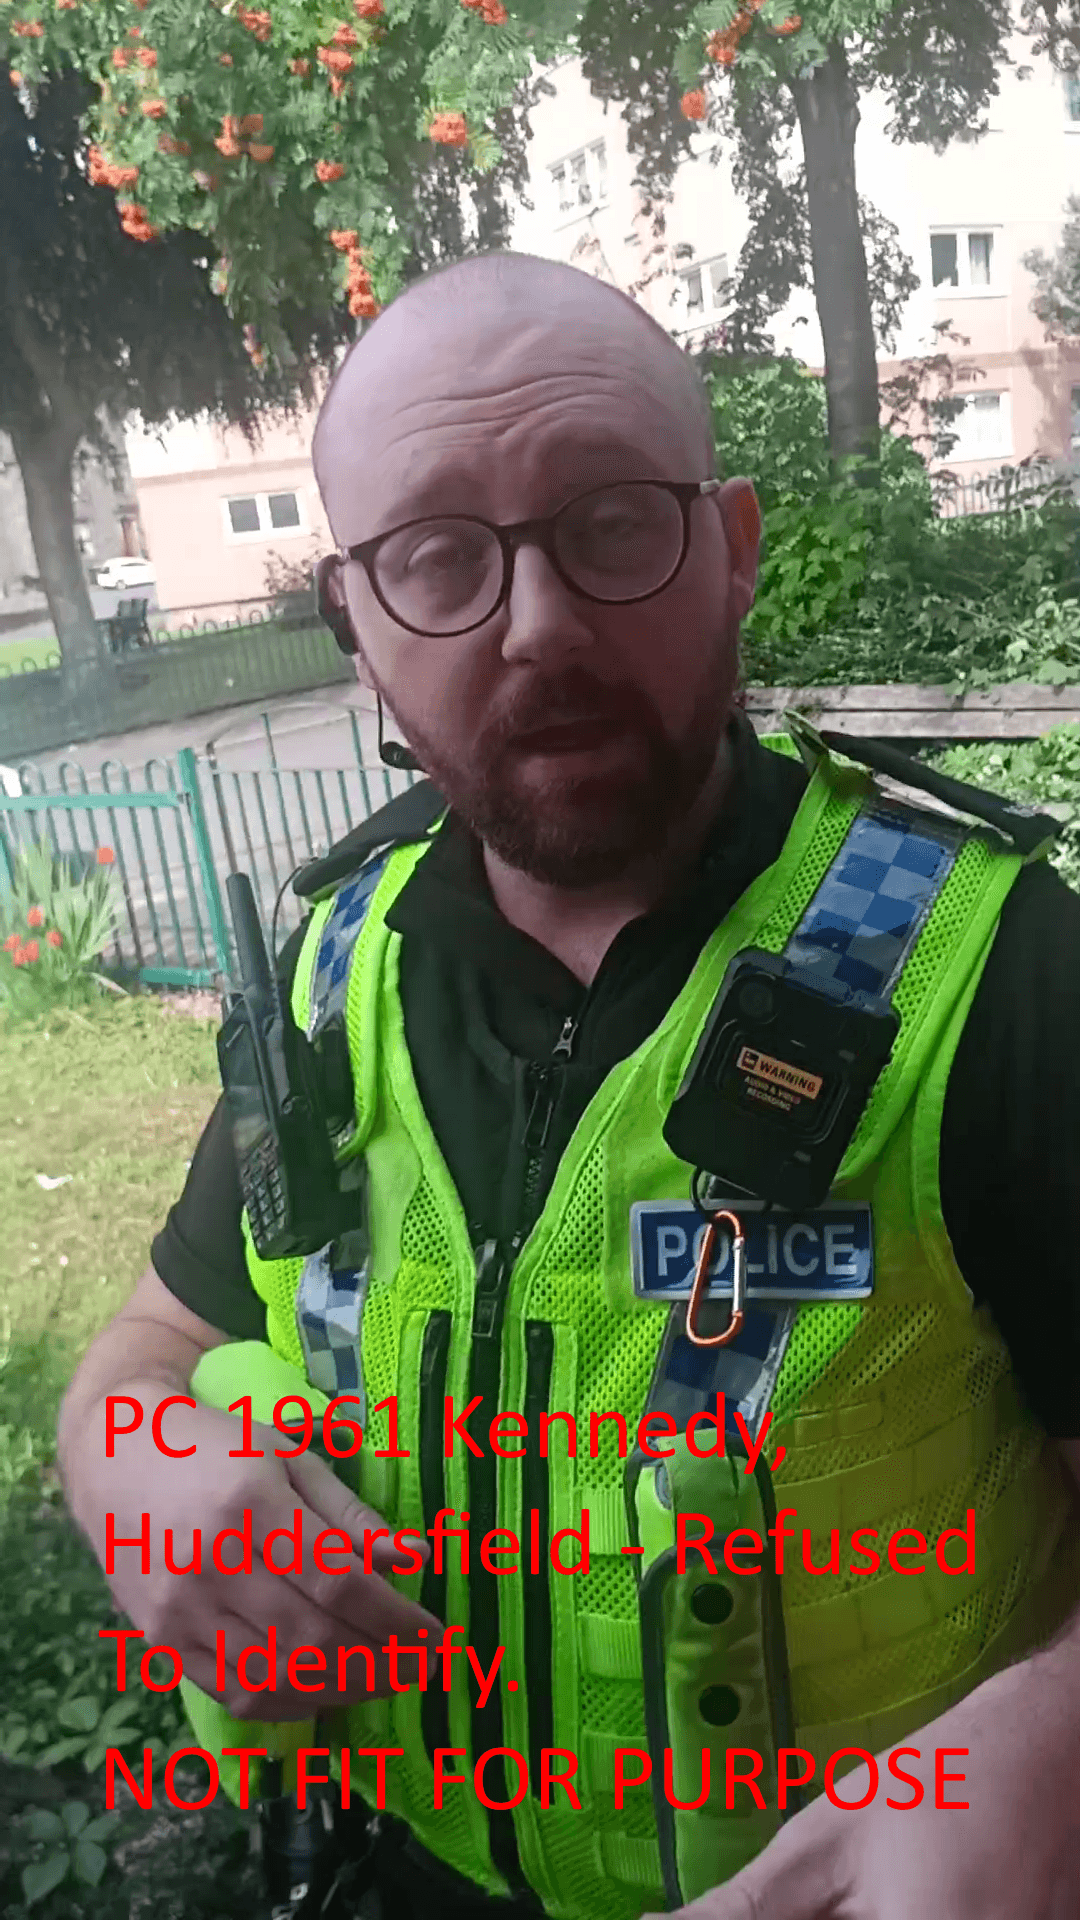 PC 1961 Kennedy, Huddersfield - Not Fit For Purpose!